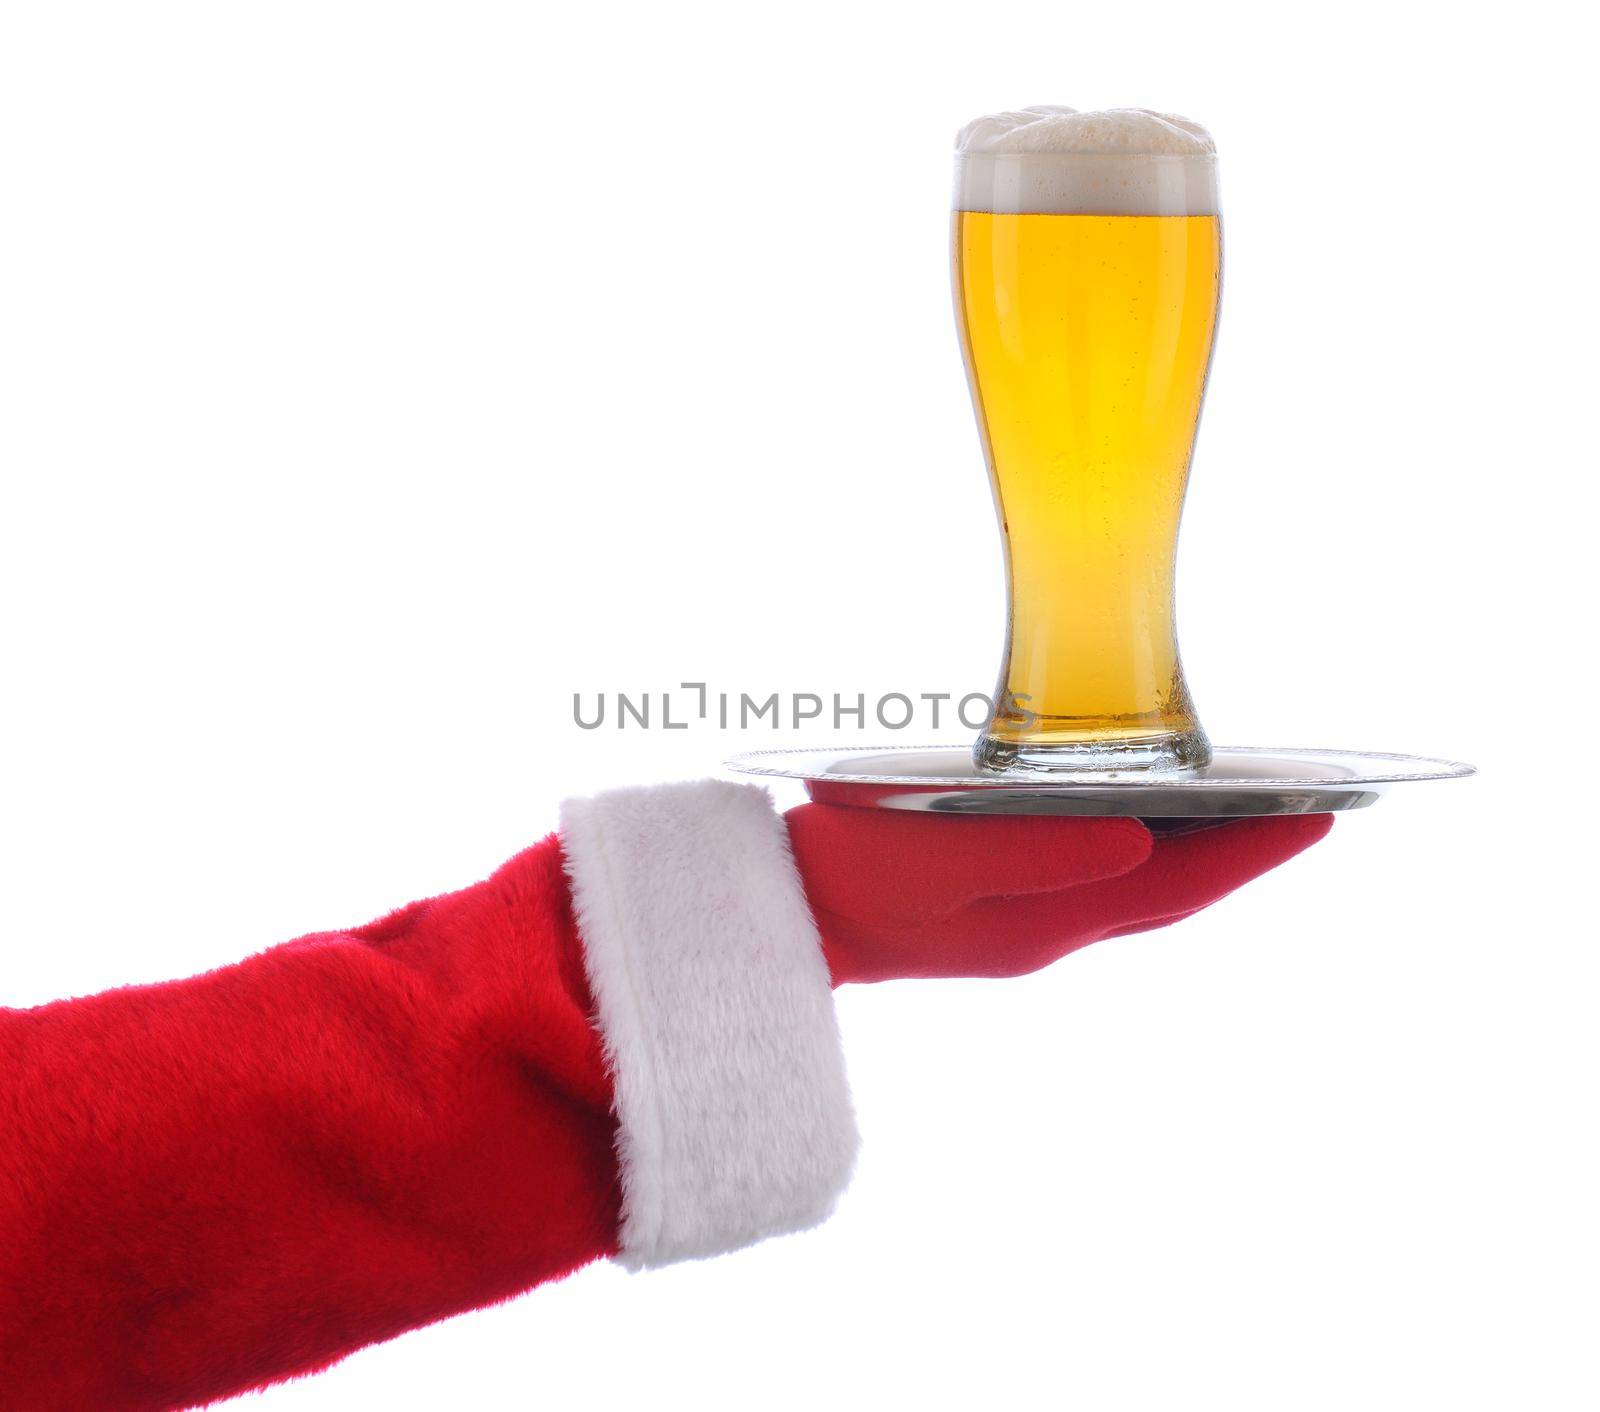 Santa with Beer Glass on Tray by sCukrov